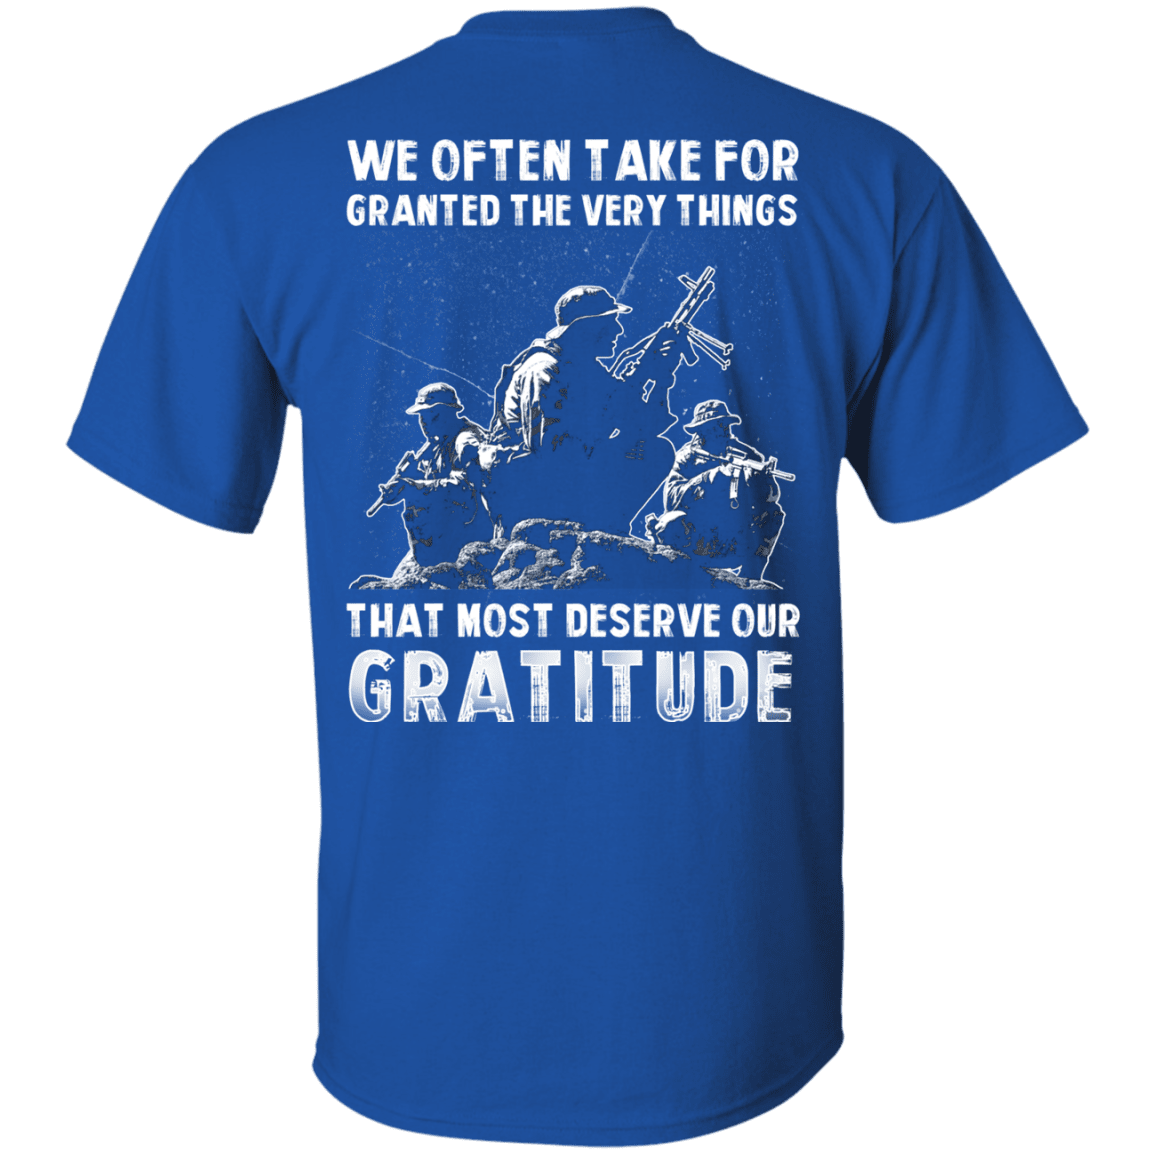 Military T-Shirt "We Often Take For Granted The Very Things" - Men Back-TShirt-General-Veterans Nation